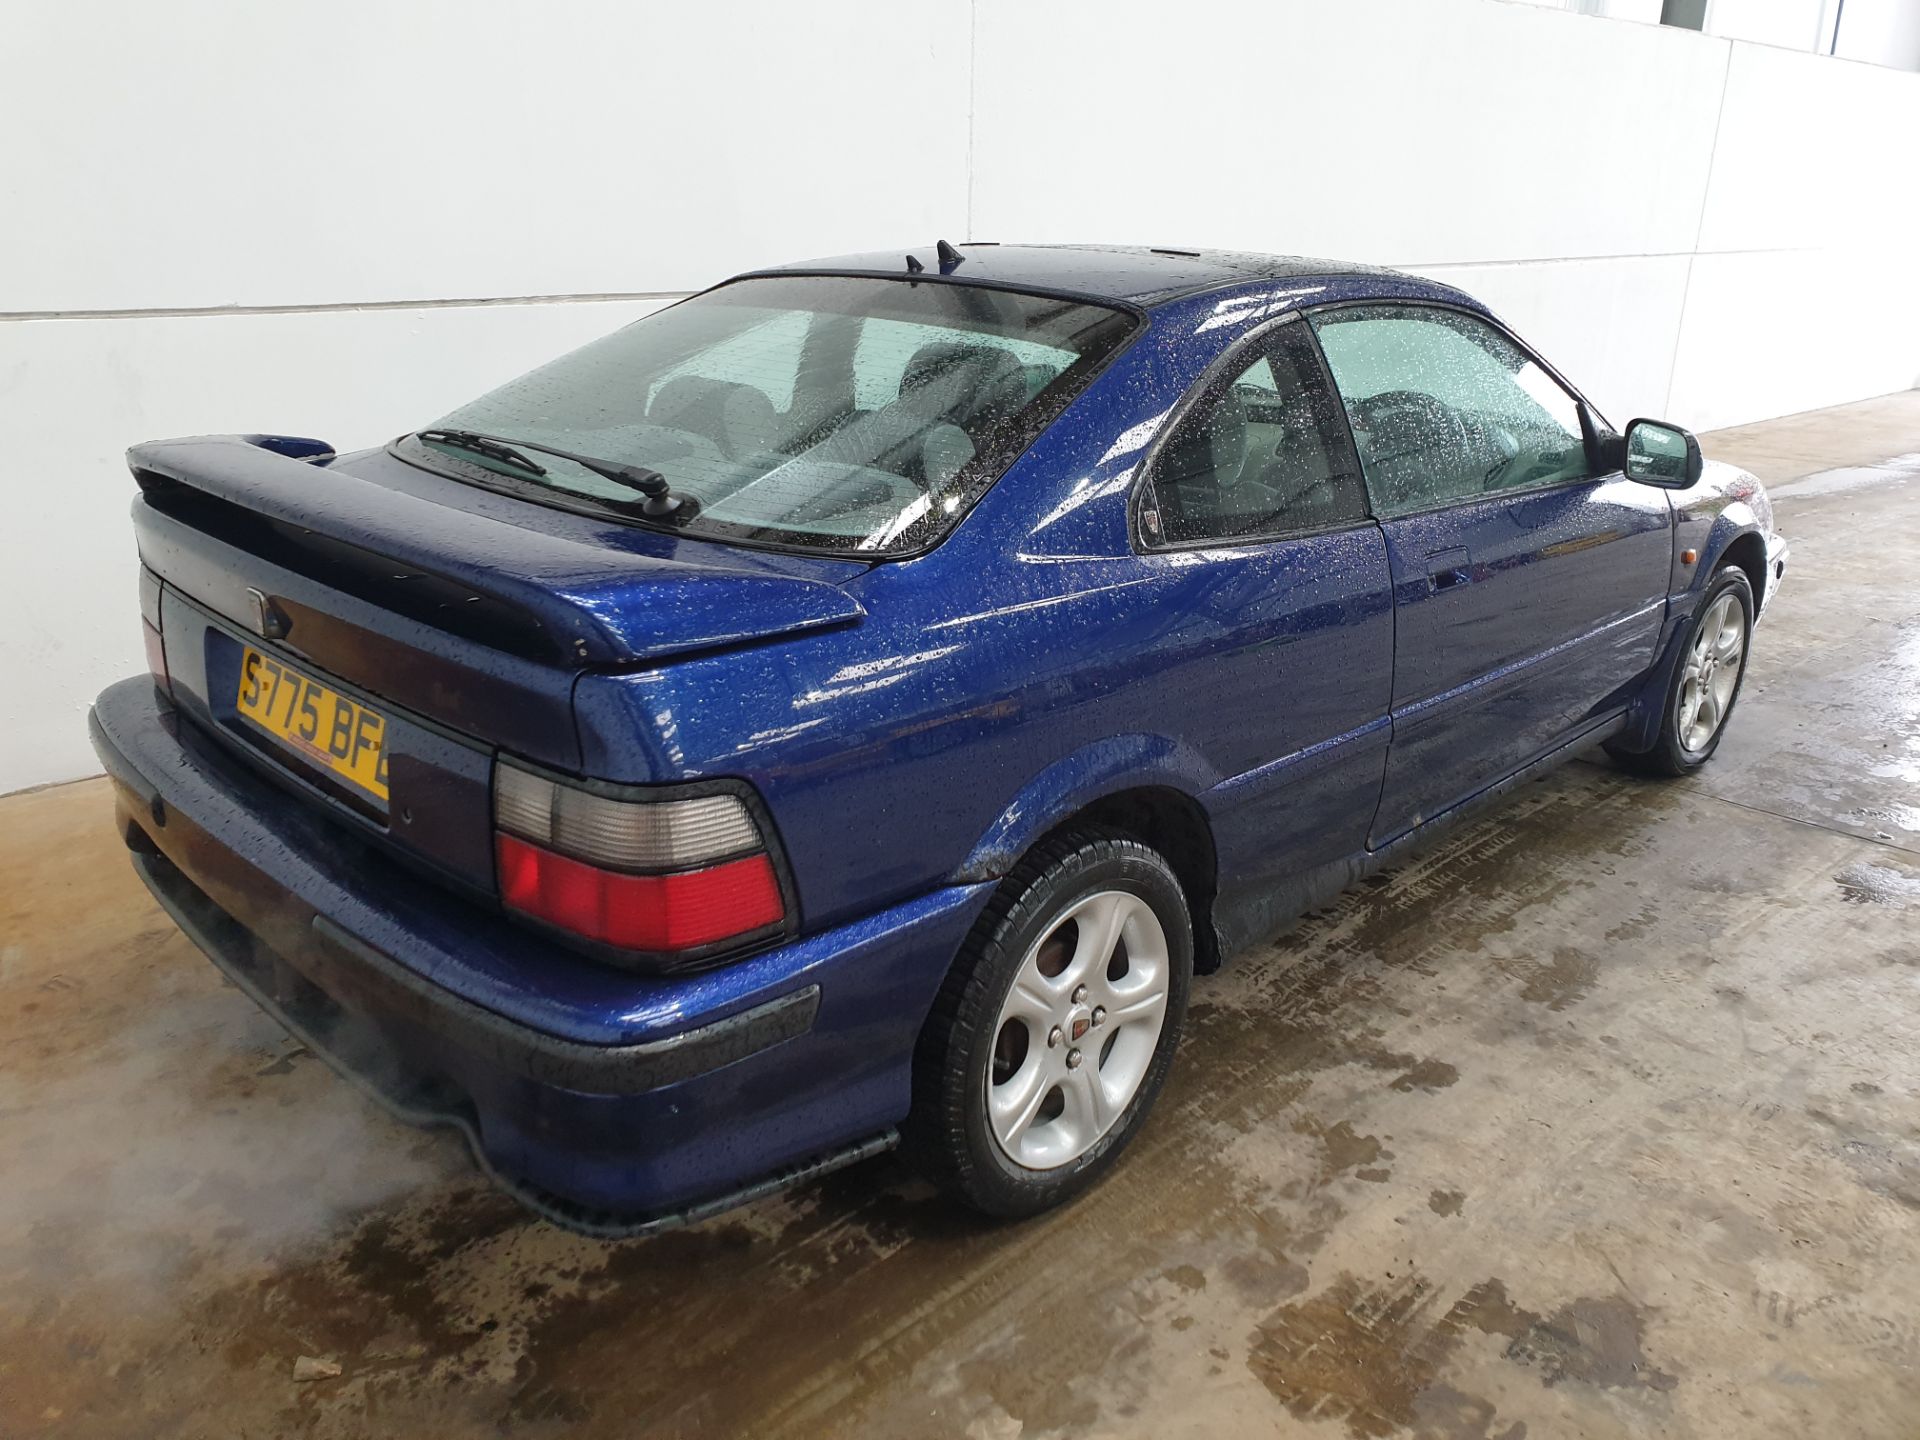 1998 Rover 216 Coupe SE - Image 3 of 11